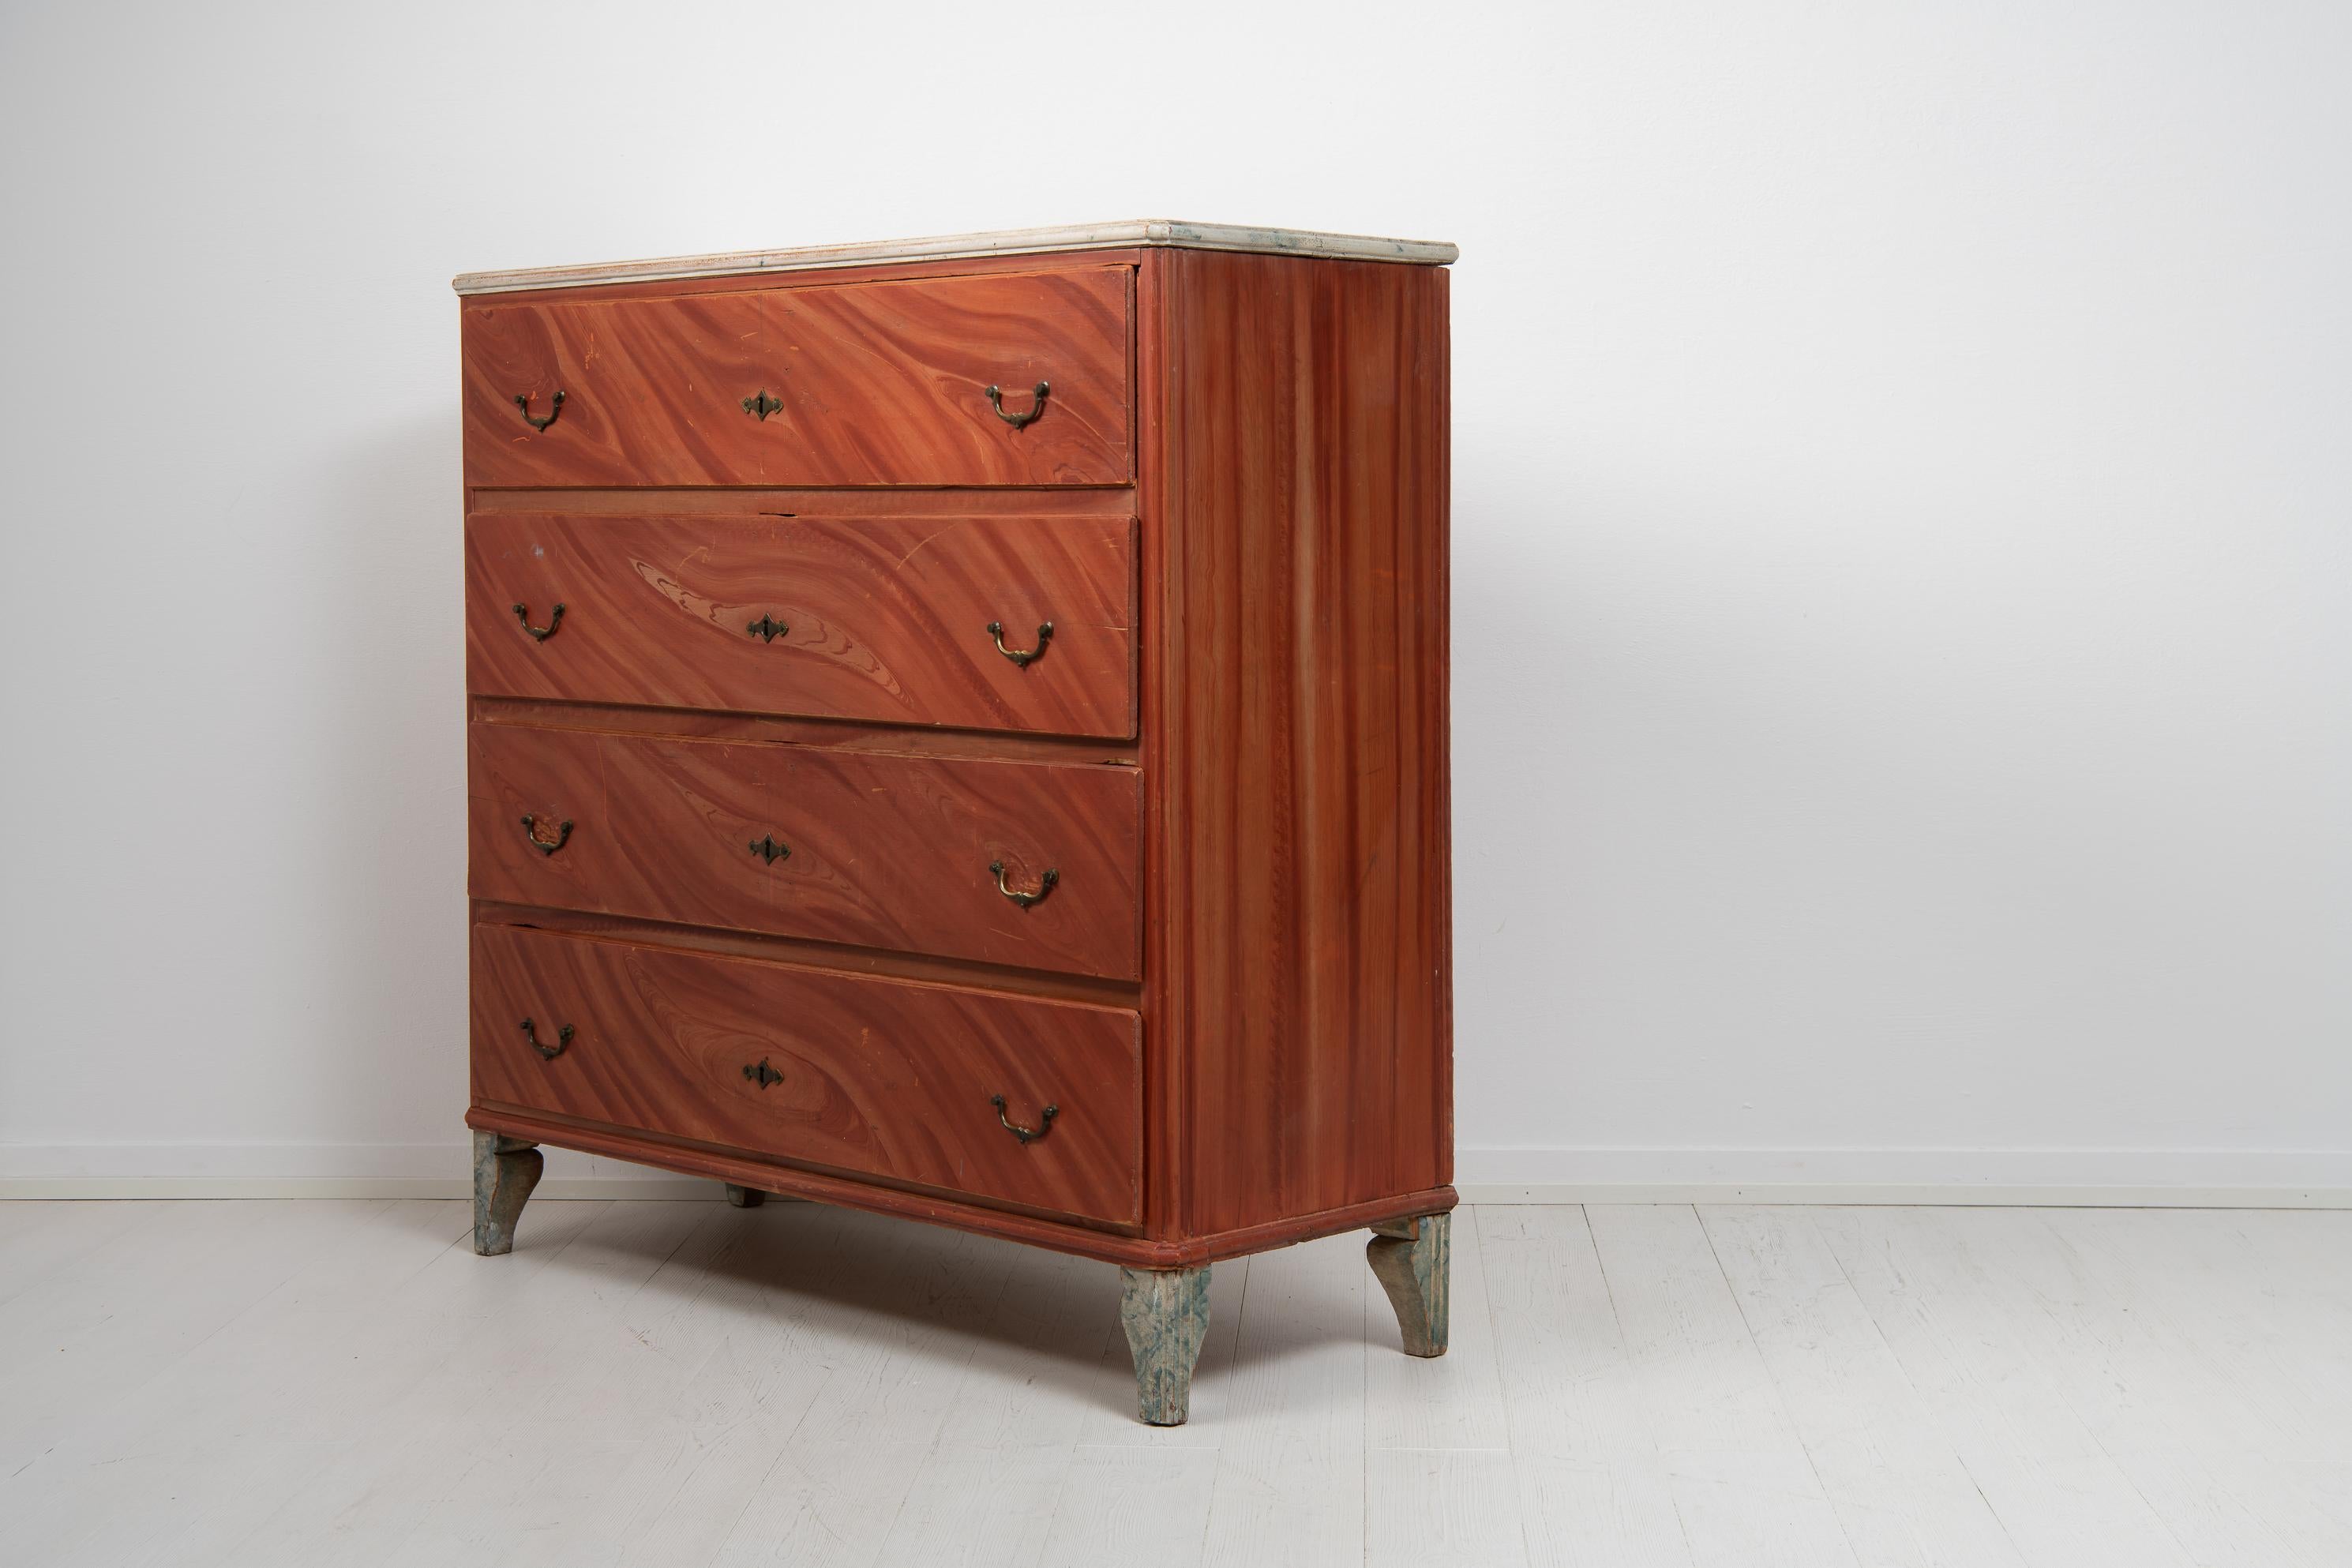 Antique Swedish Genuine Tall Red Painted Gustavian Country Chest of Drawers In Good Condition For Sale In Kramfors, SE